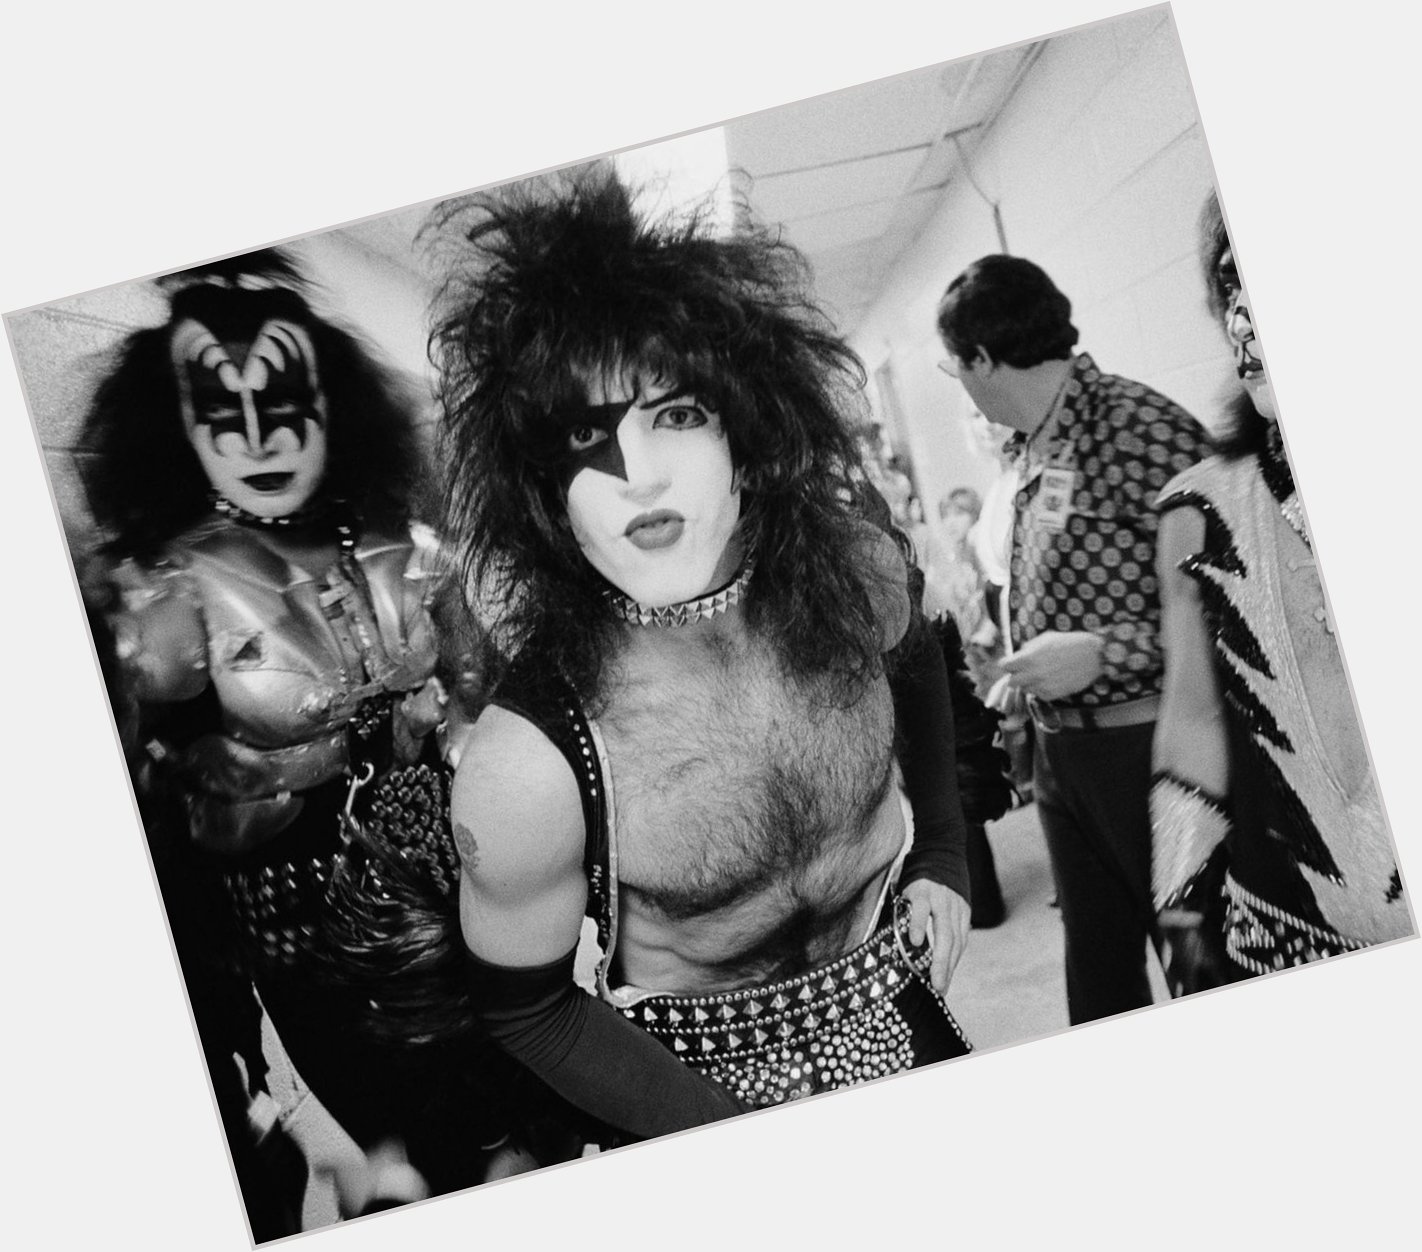 Please join me here at in wishing the one and only Paul Stanley a very Happy 69th Birthday today  